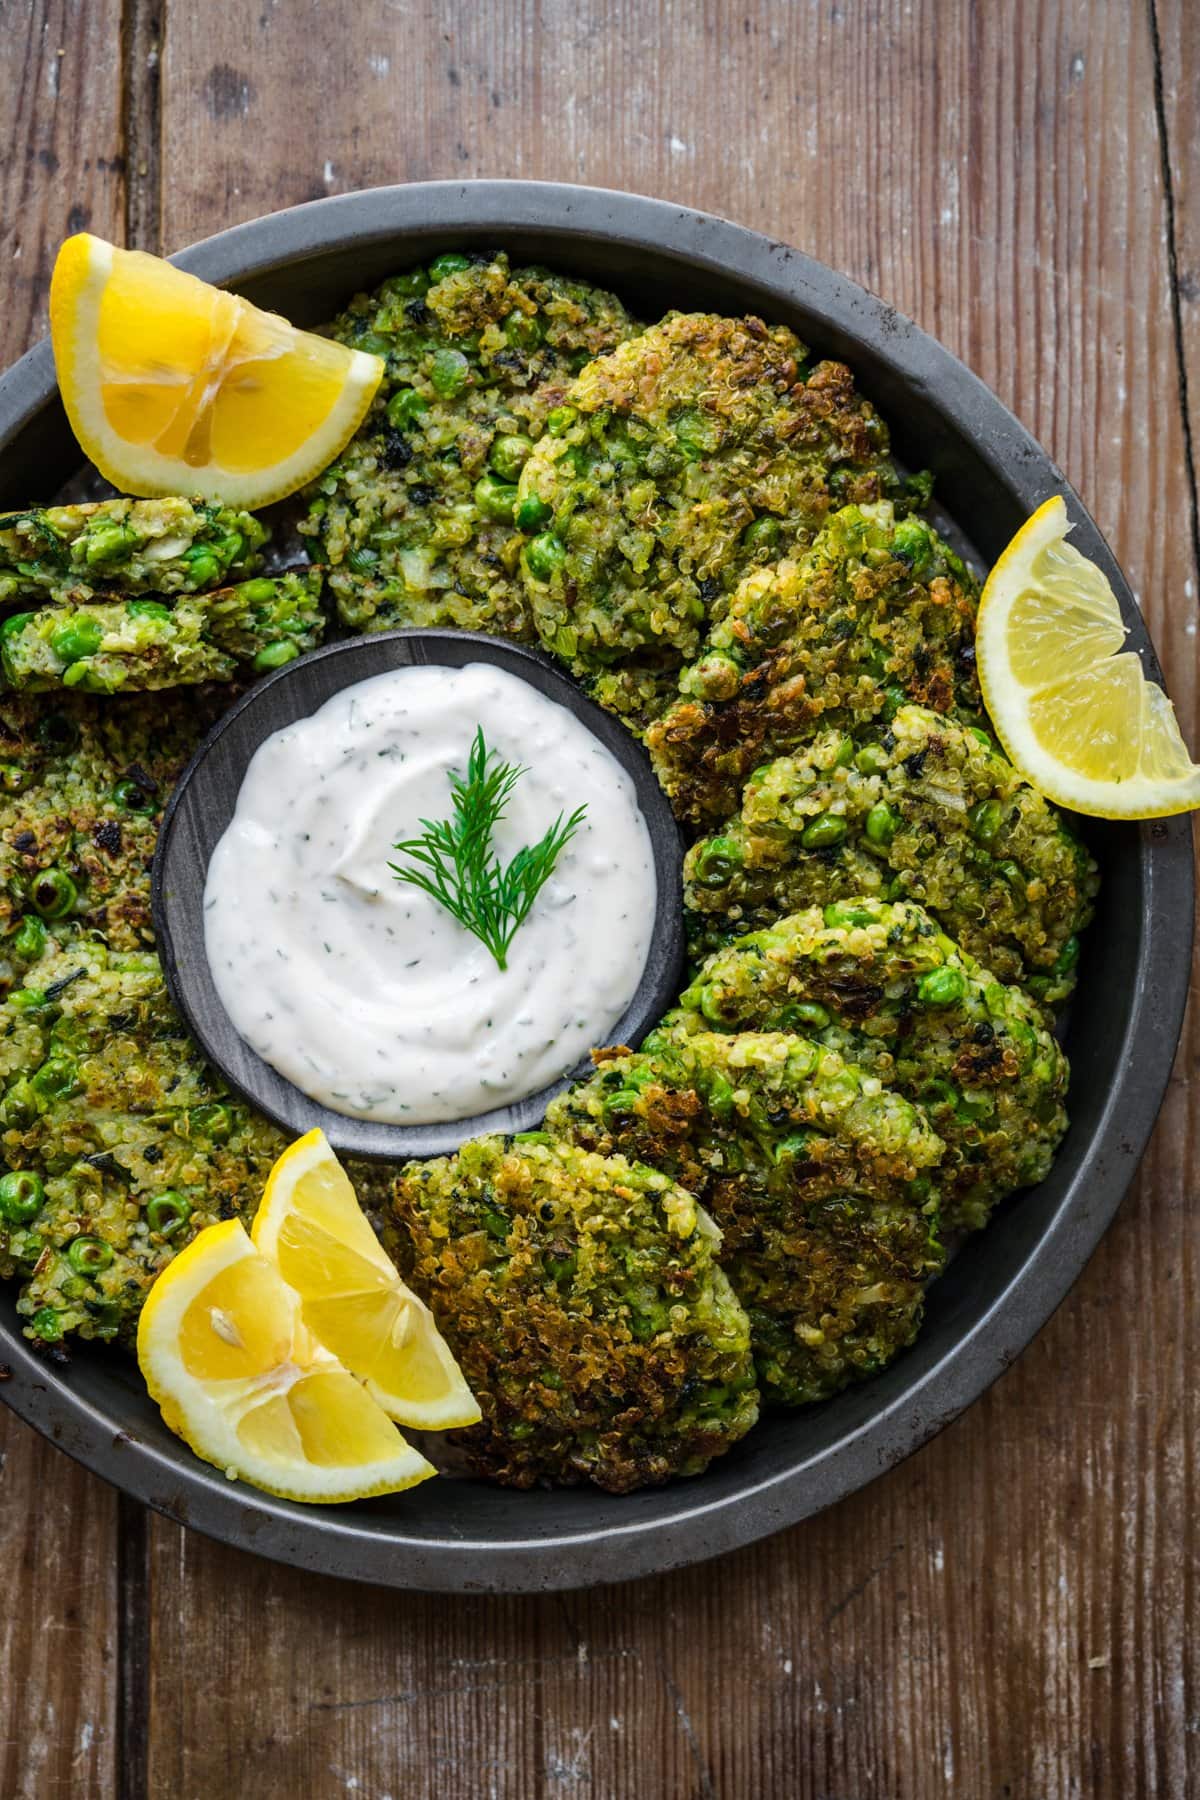 Pea fritters arranged in a circle around lemon dill sauce.